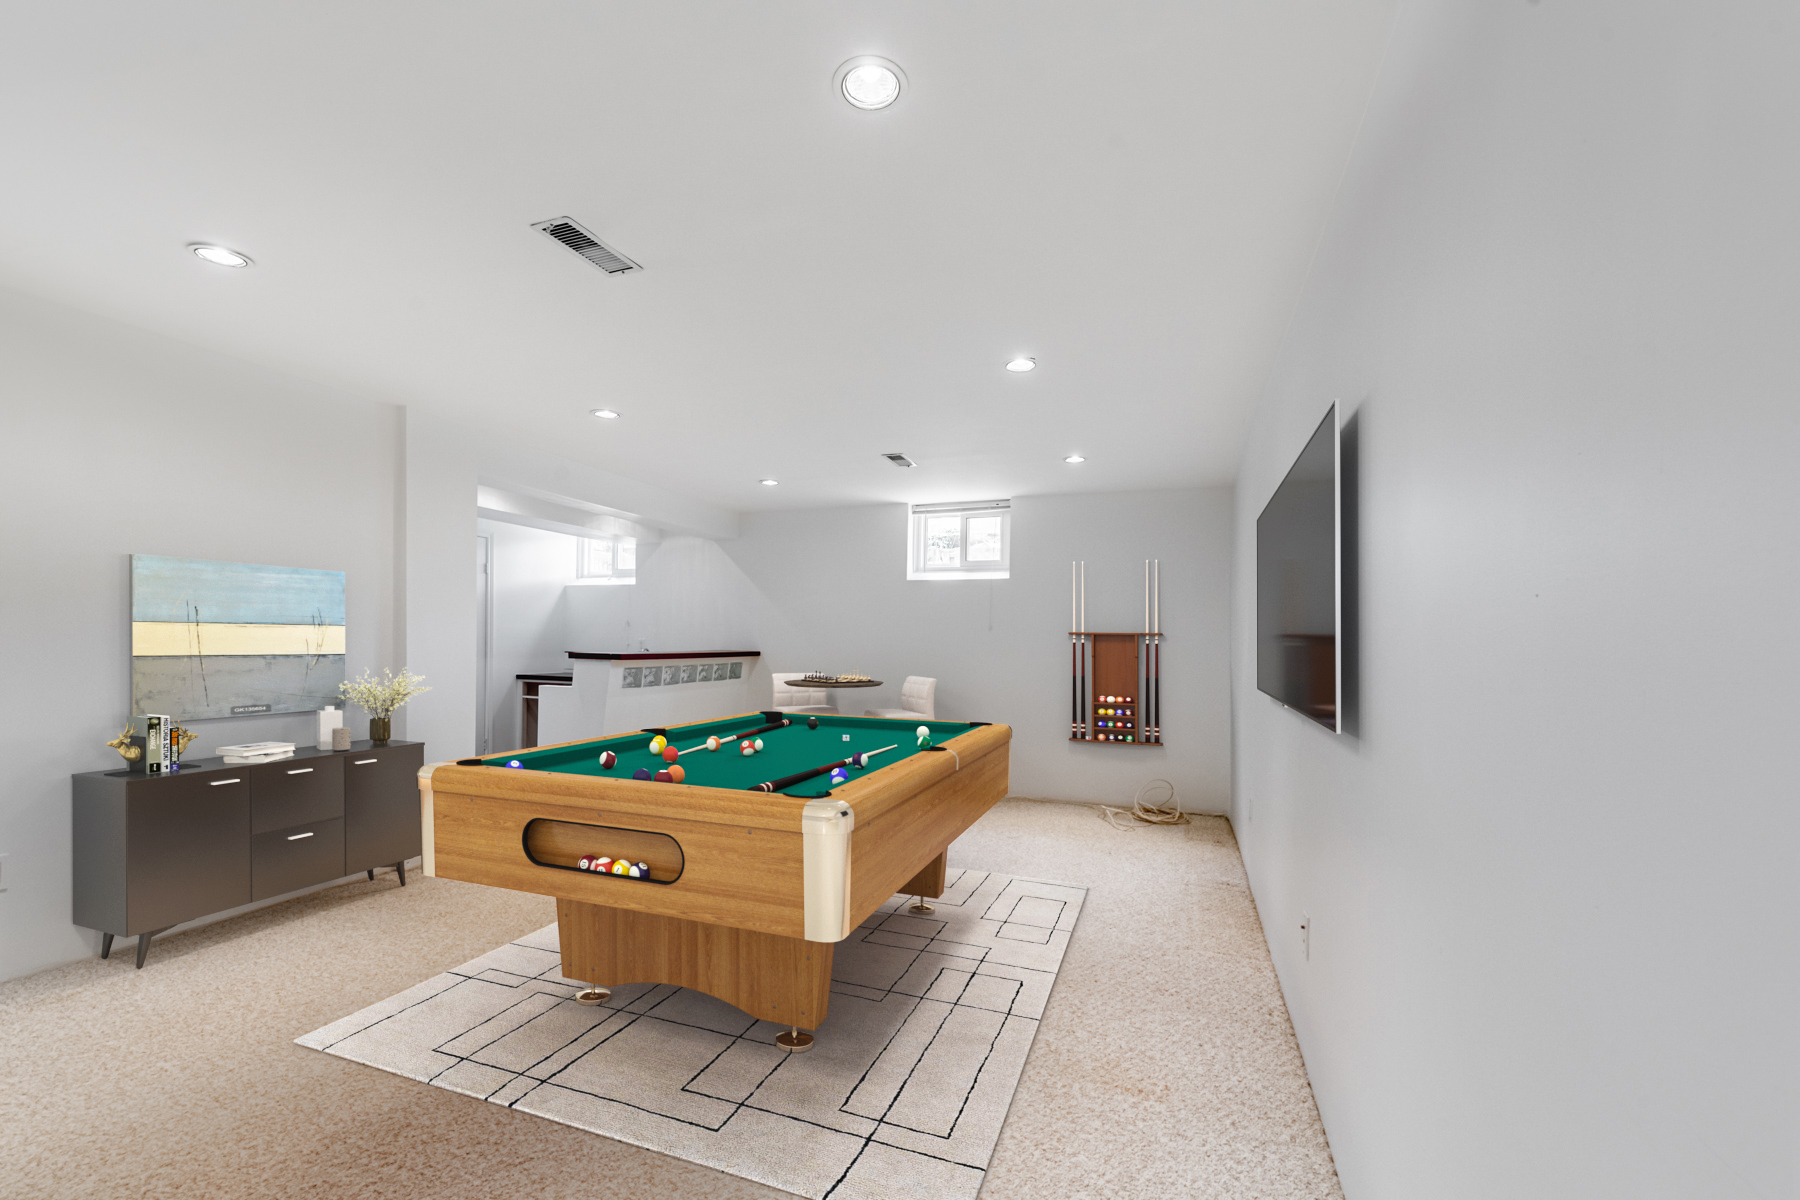 Basement family room and rec room with 3D rendered billiards table.